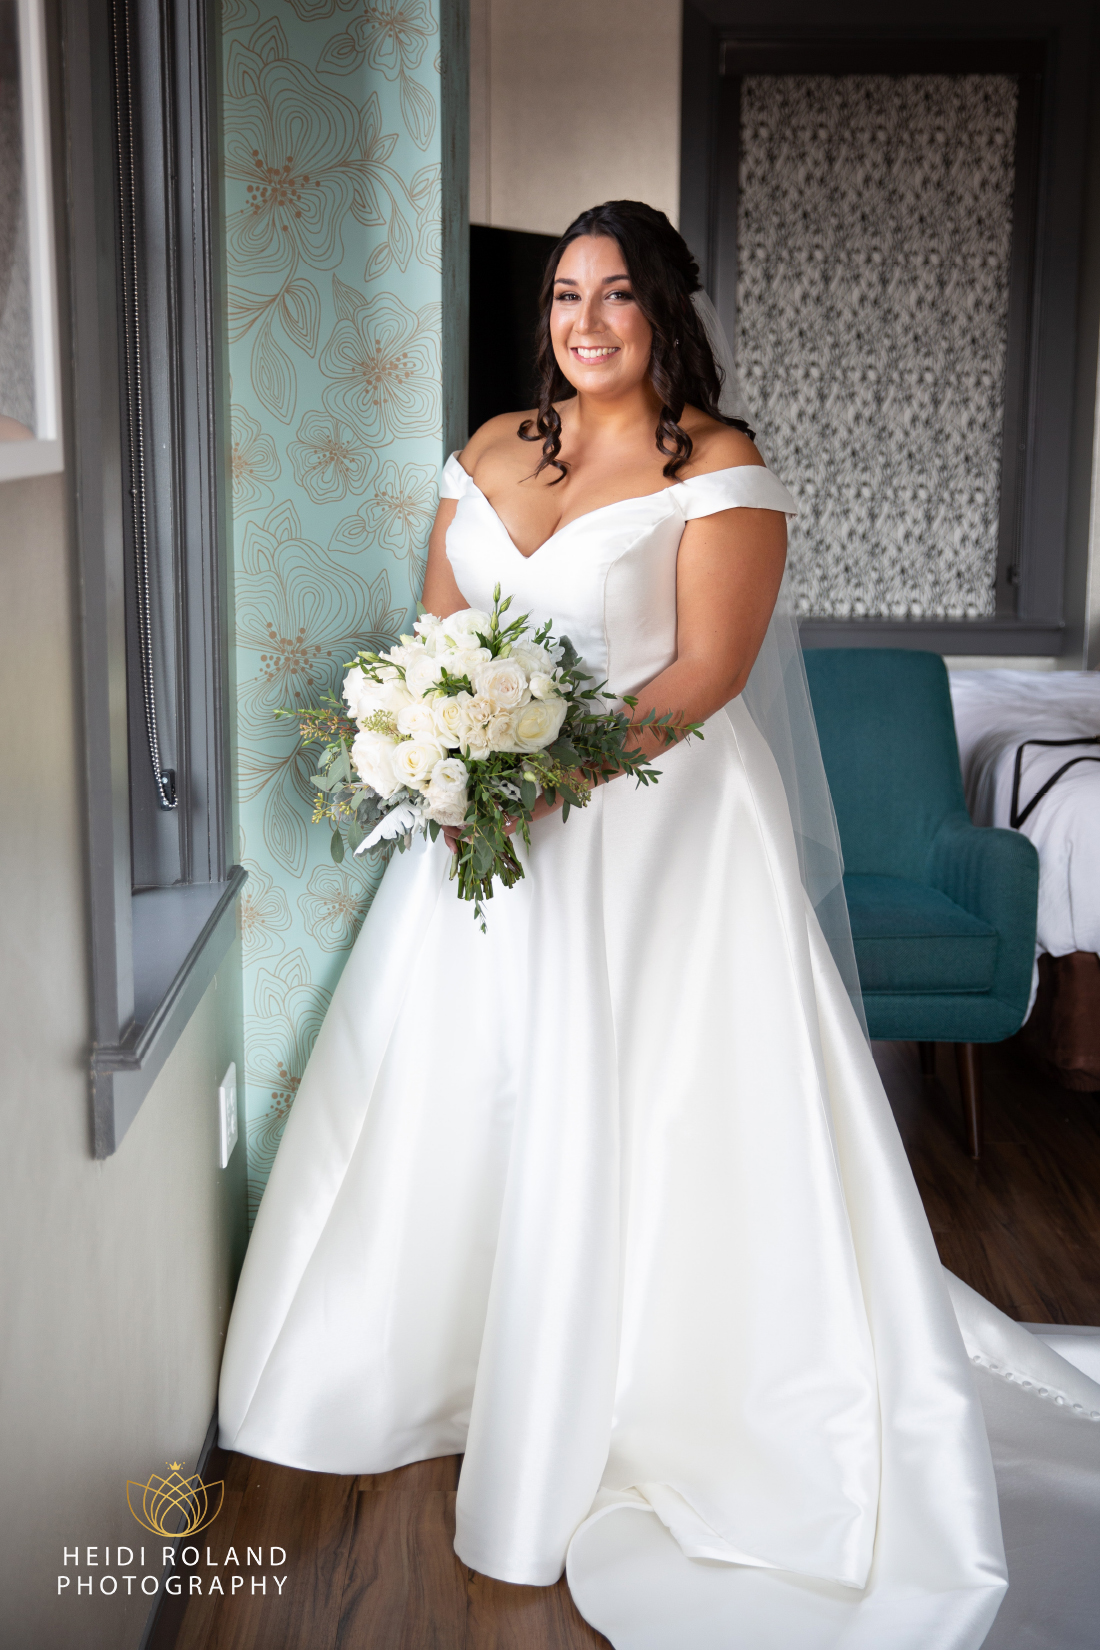 Philadelphia bride holding a bouquet of white roses in hotel room